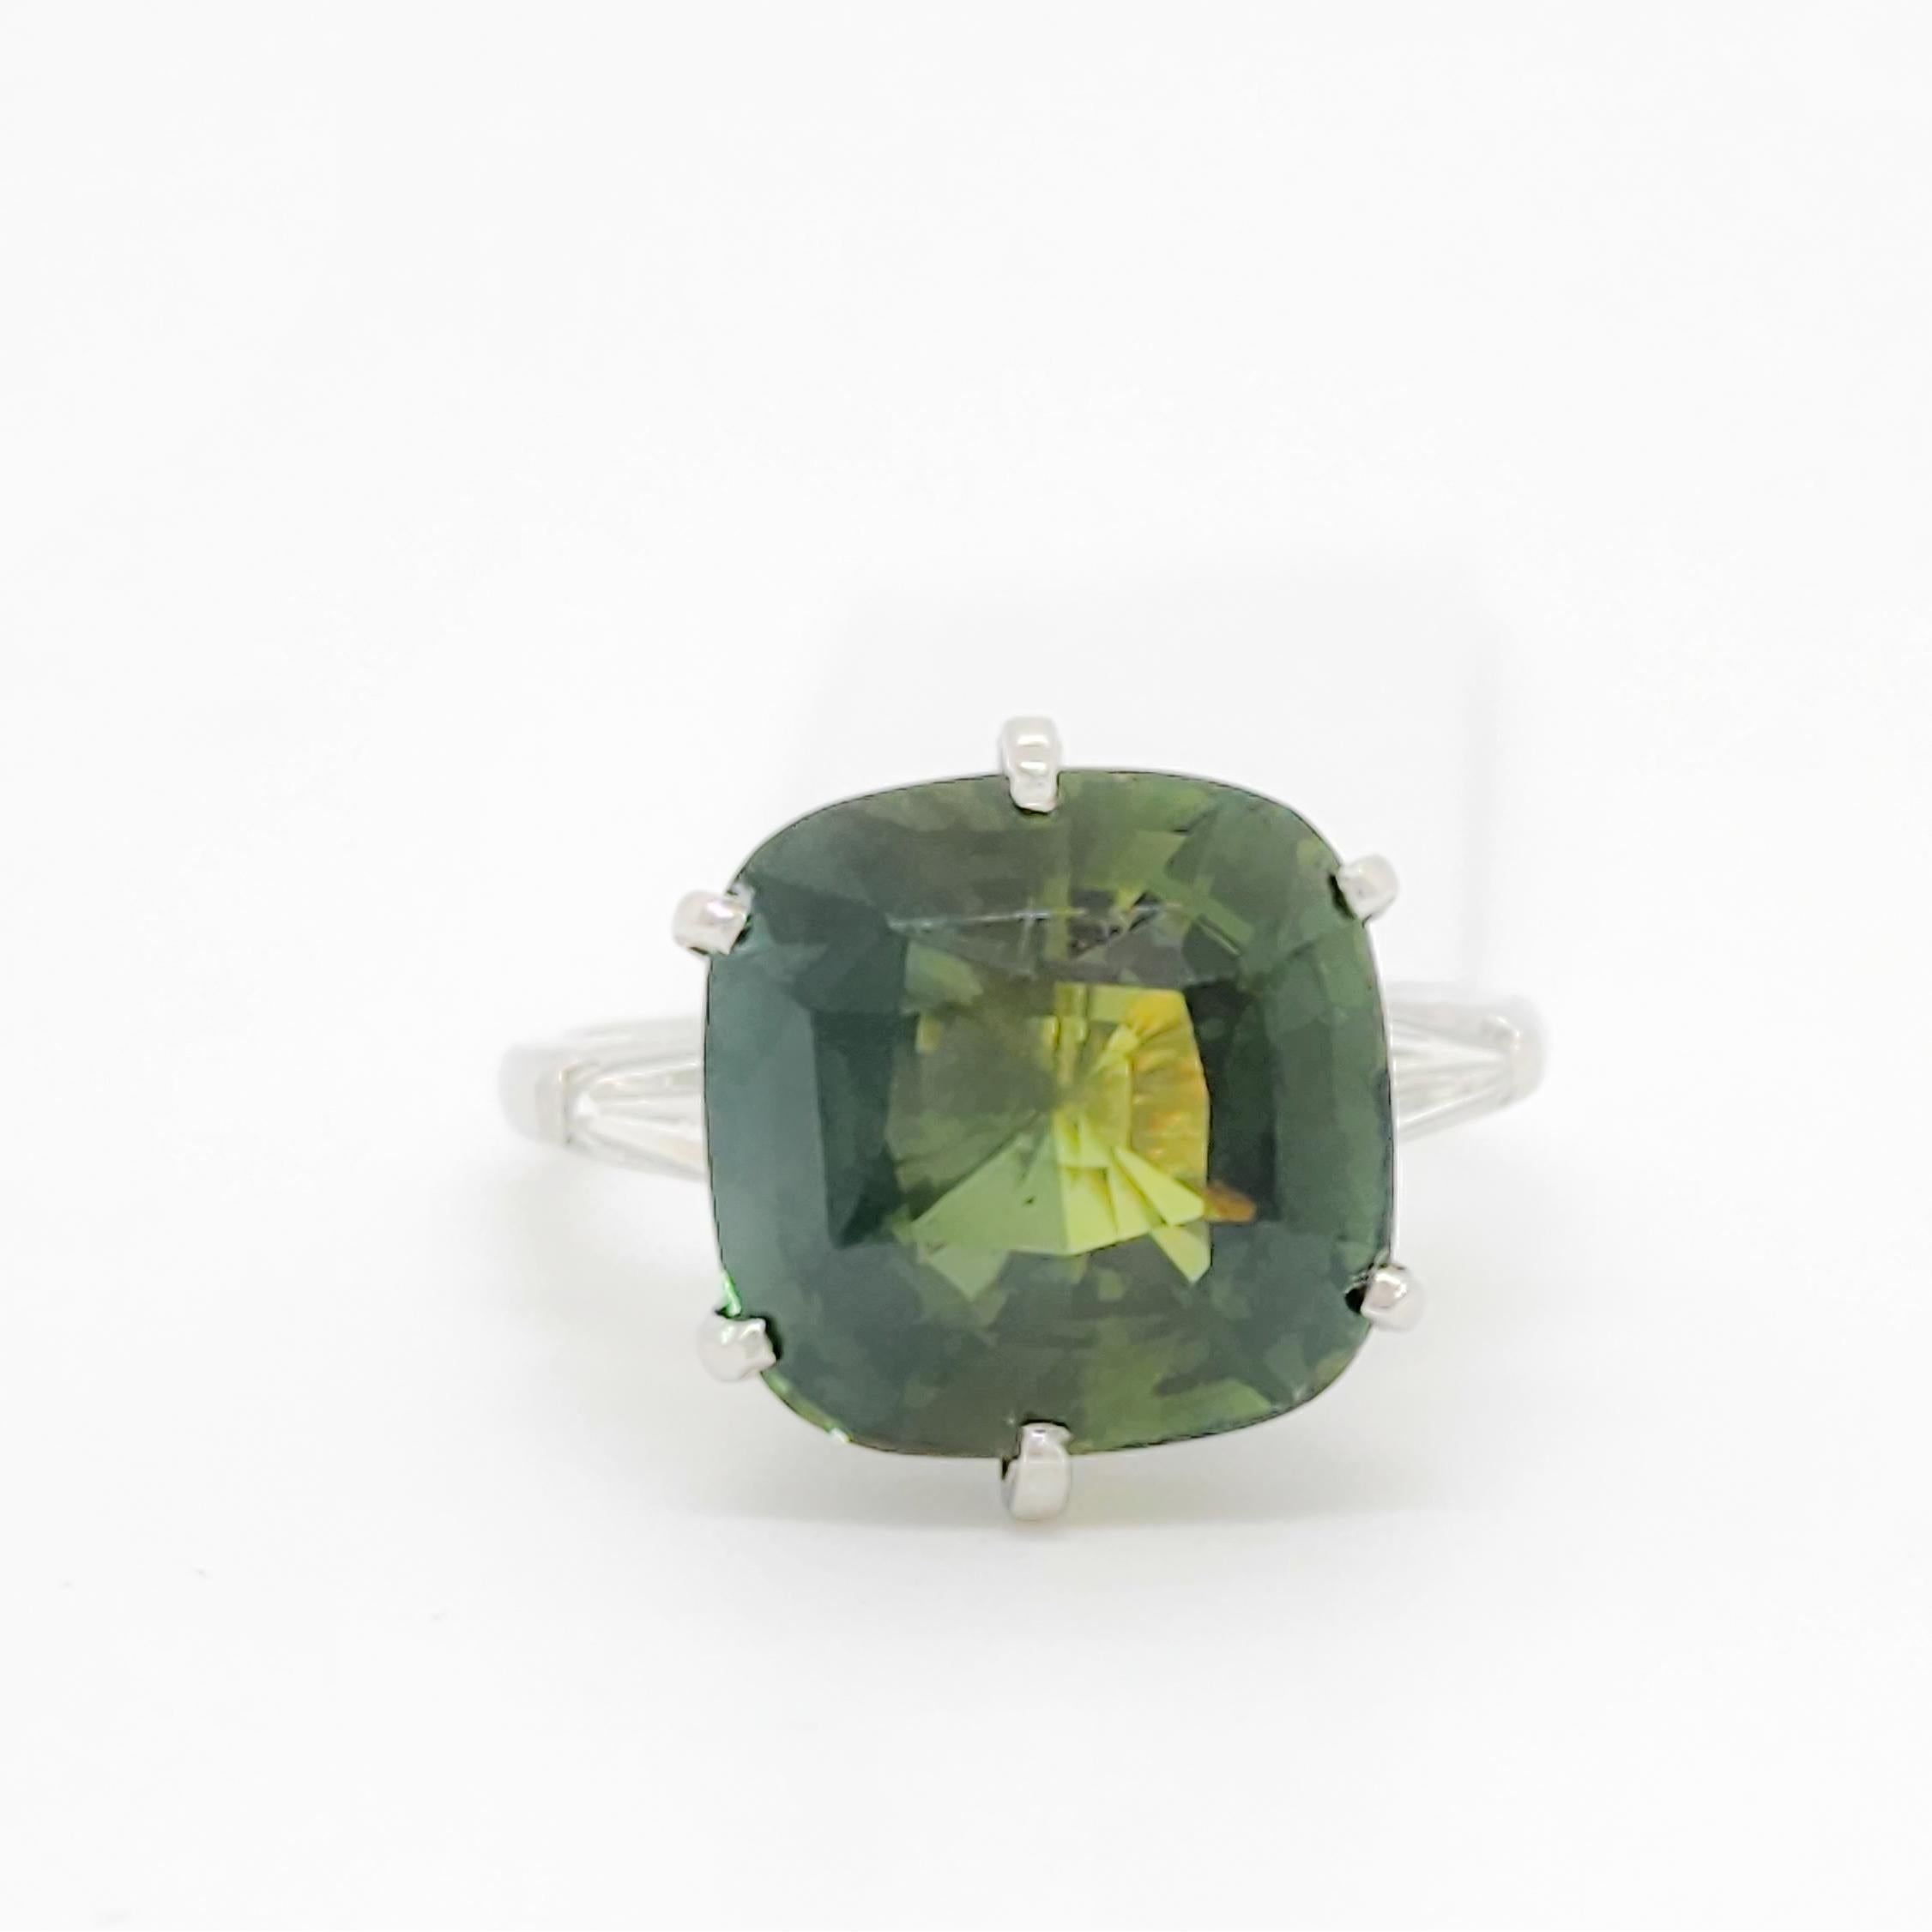 Gorgeous 9.97 ct. green sapphire cushion with 0.20 ct. good quality white diamond baguettes.  Handmade in platinum.  Ring size 6.75.  GIA certificate included.